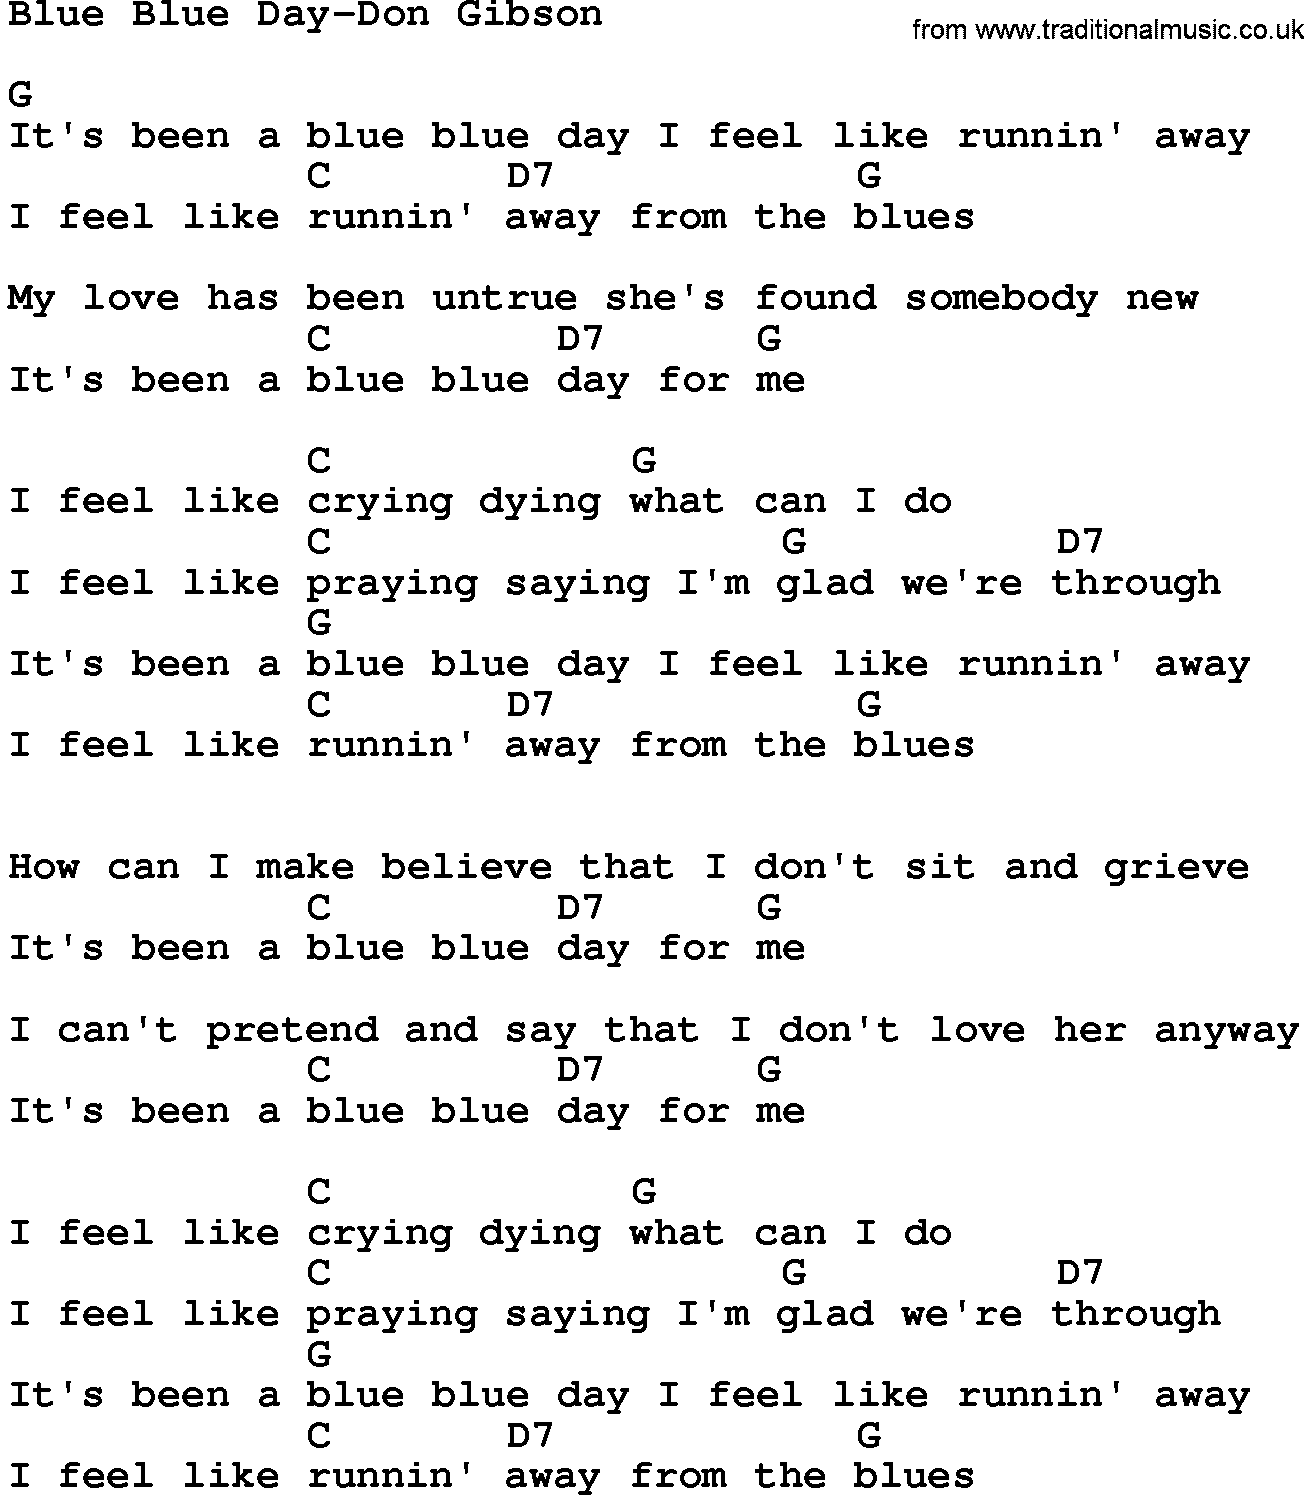 Country music song: Blue Blue Day-Don Gibson lyrics and chords